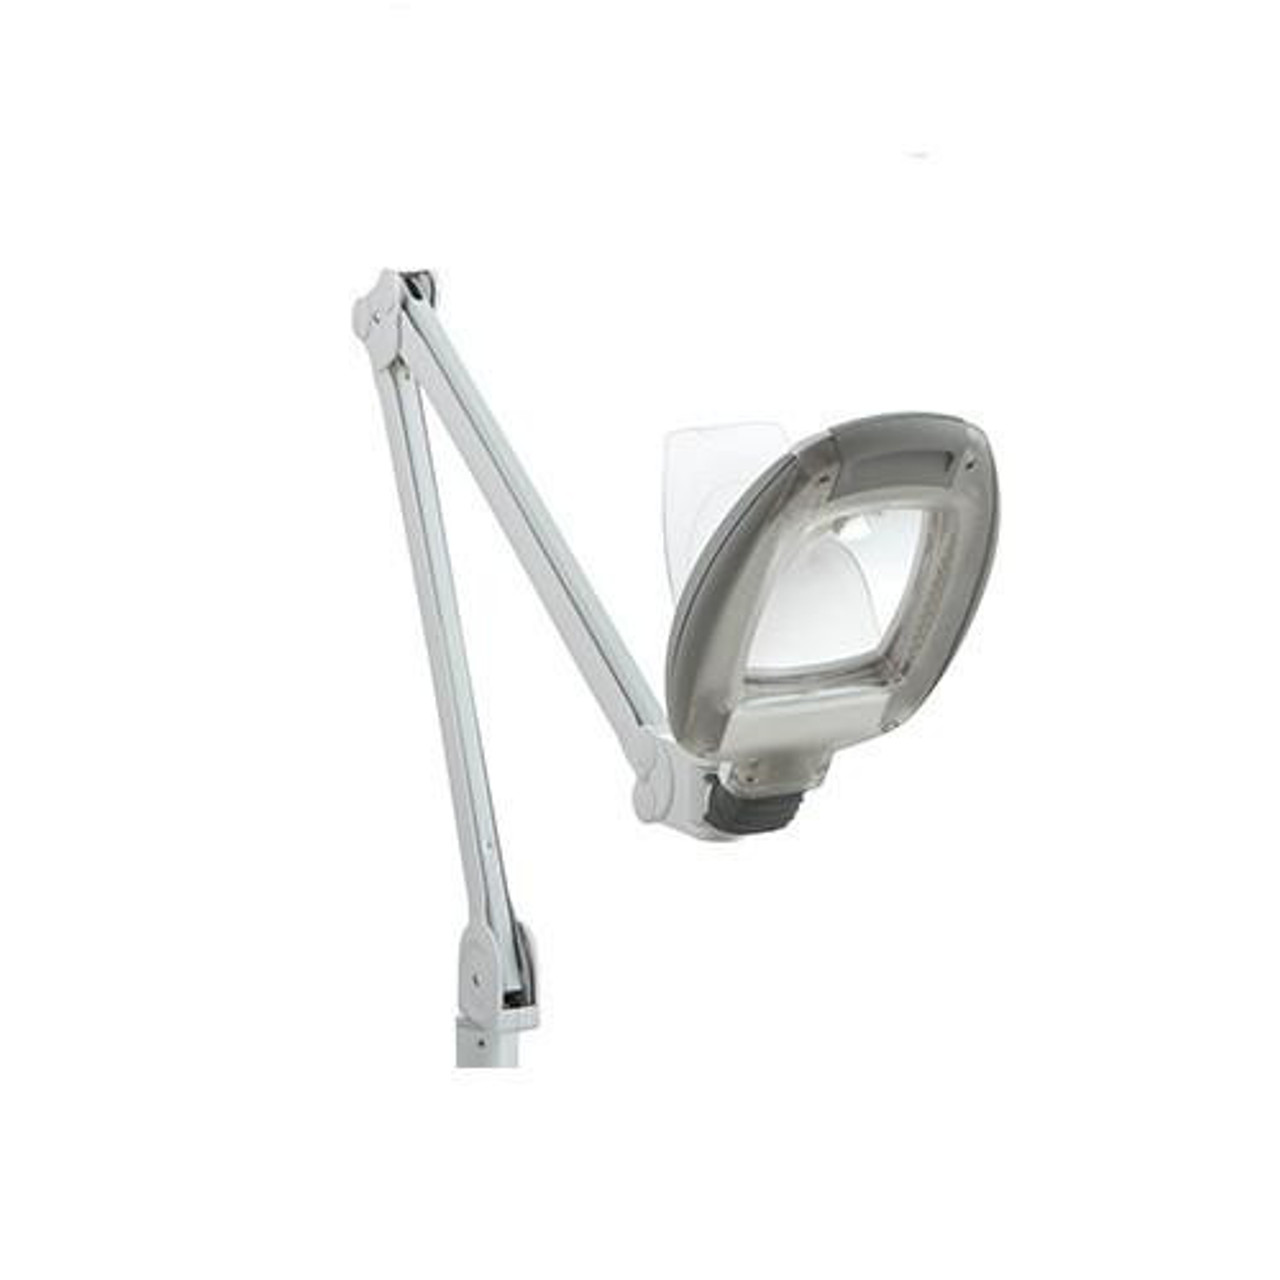 21-10265 - Duratool - Magnifier, Lamp, 3 Diopter Magnification